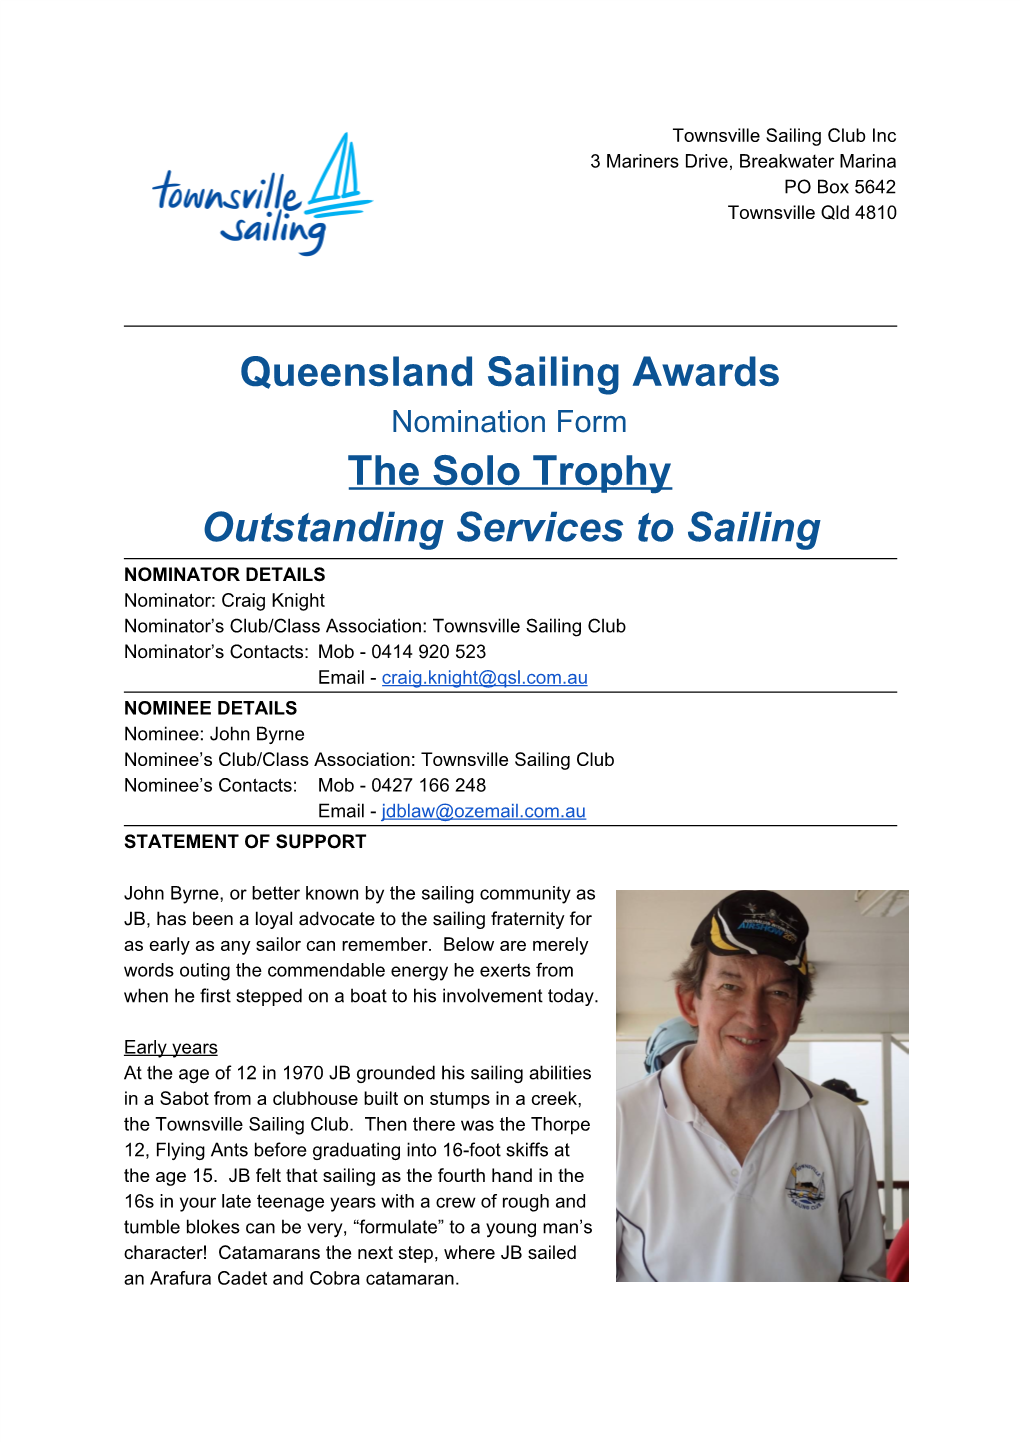 Queensland Sailing Awards the Solo Trophy Outstanding Services To